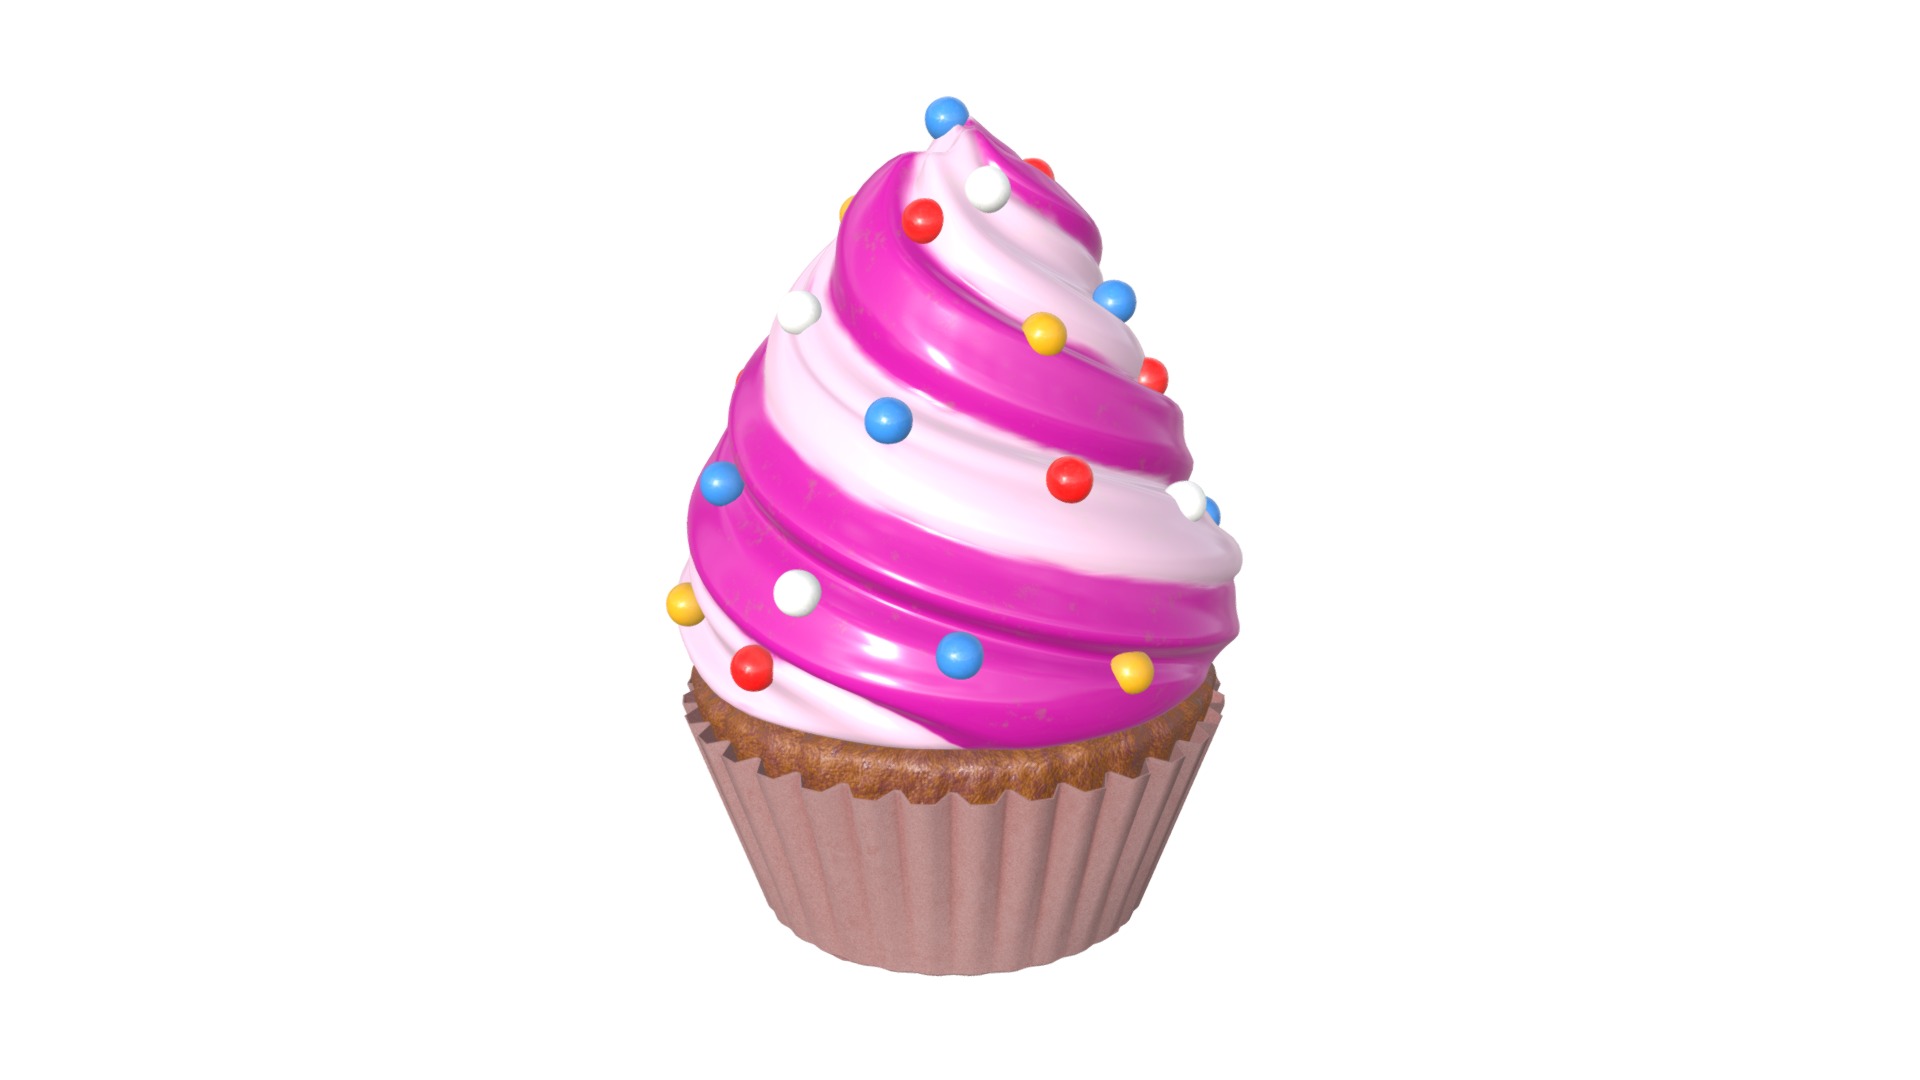 3D model Сupcake wave - This is a 3D model of the Сupcake wave. The 3D model is about a cupcake with frosting and sprinkles.